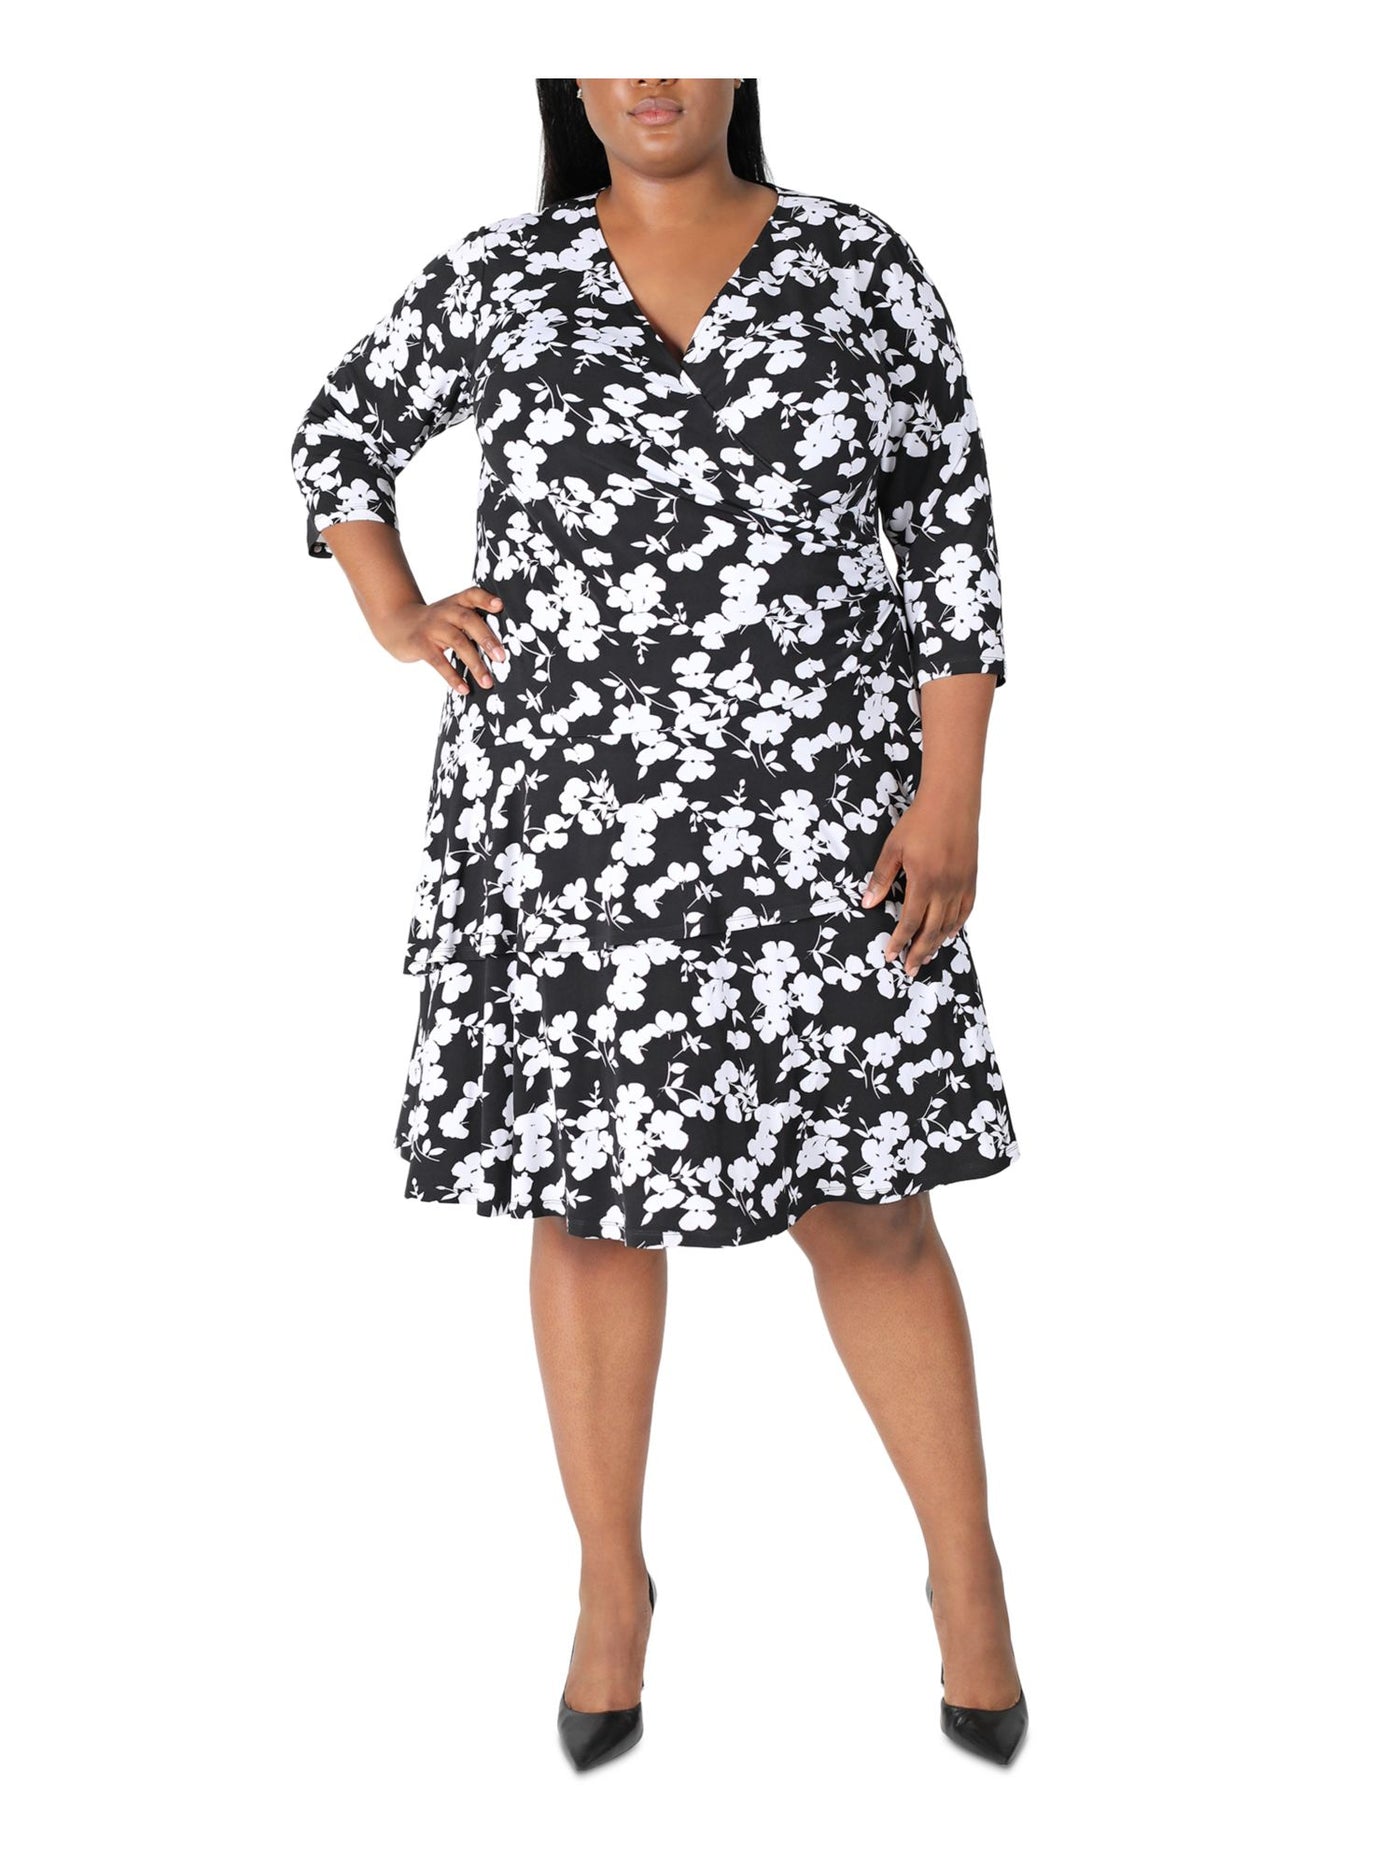 SIGNATURE BY ROBBIE BEE Womens Black Stretch Ruffled Floral Elbow Sleeve Surplice Neckline Knee Length Wear To Work Shift Dress Plus 1X